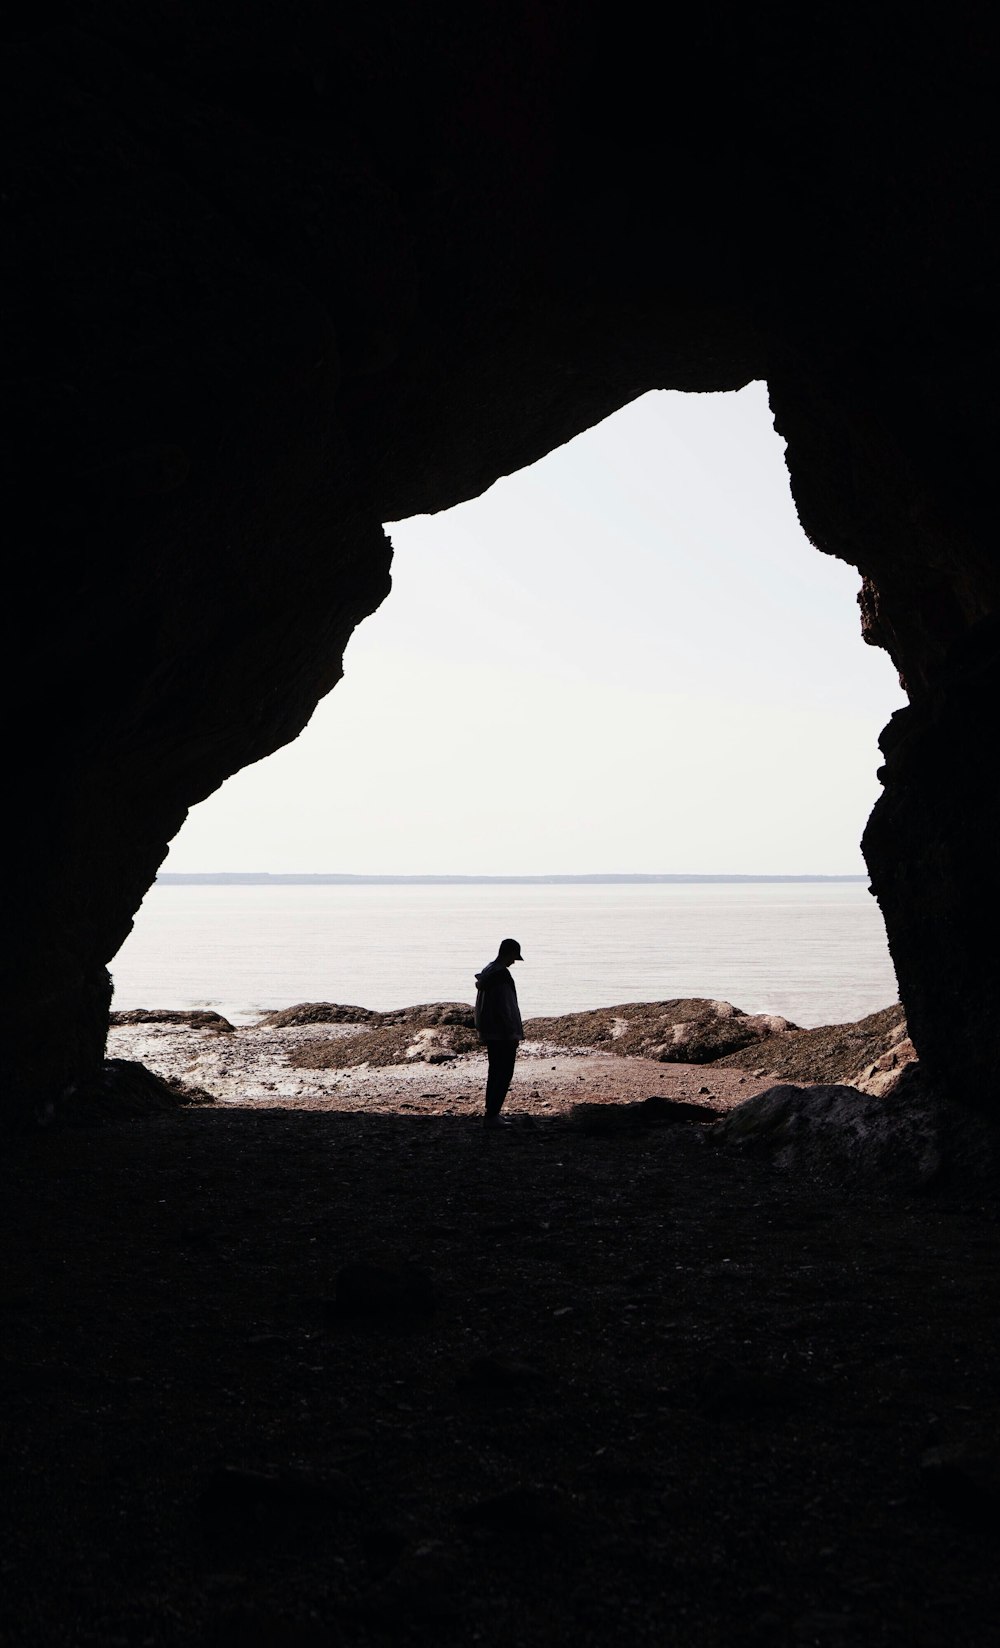 silhouette of person standing on cave entrance across horizon